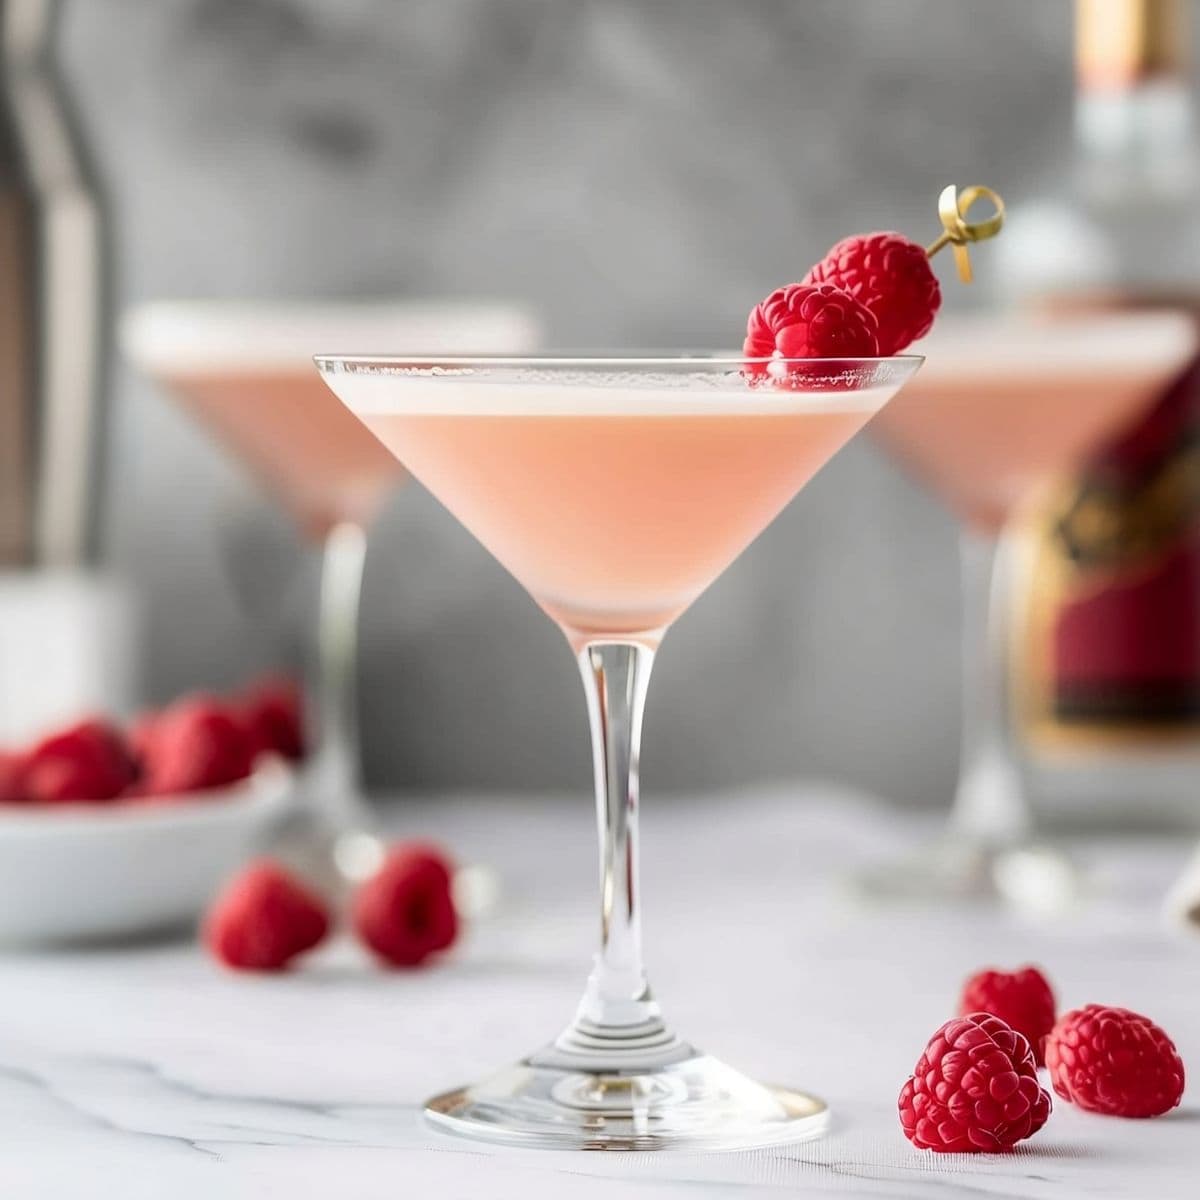 Three French Martinis with Raspberries on a White Marble Table with a Bottle of Chambord, a Cocktail Shaker, and More Raspberries in the Background